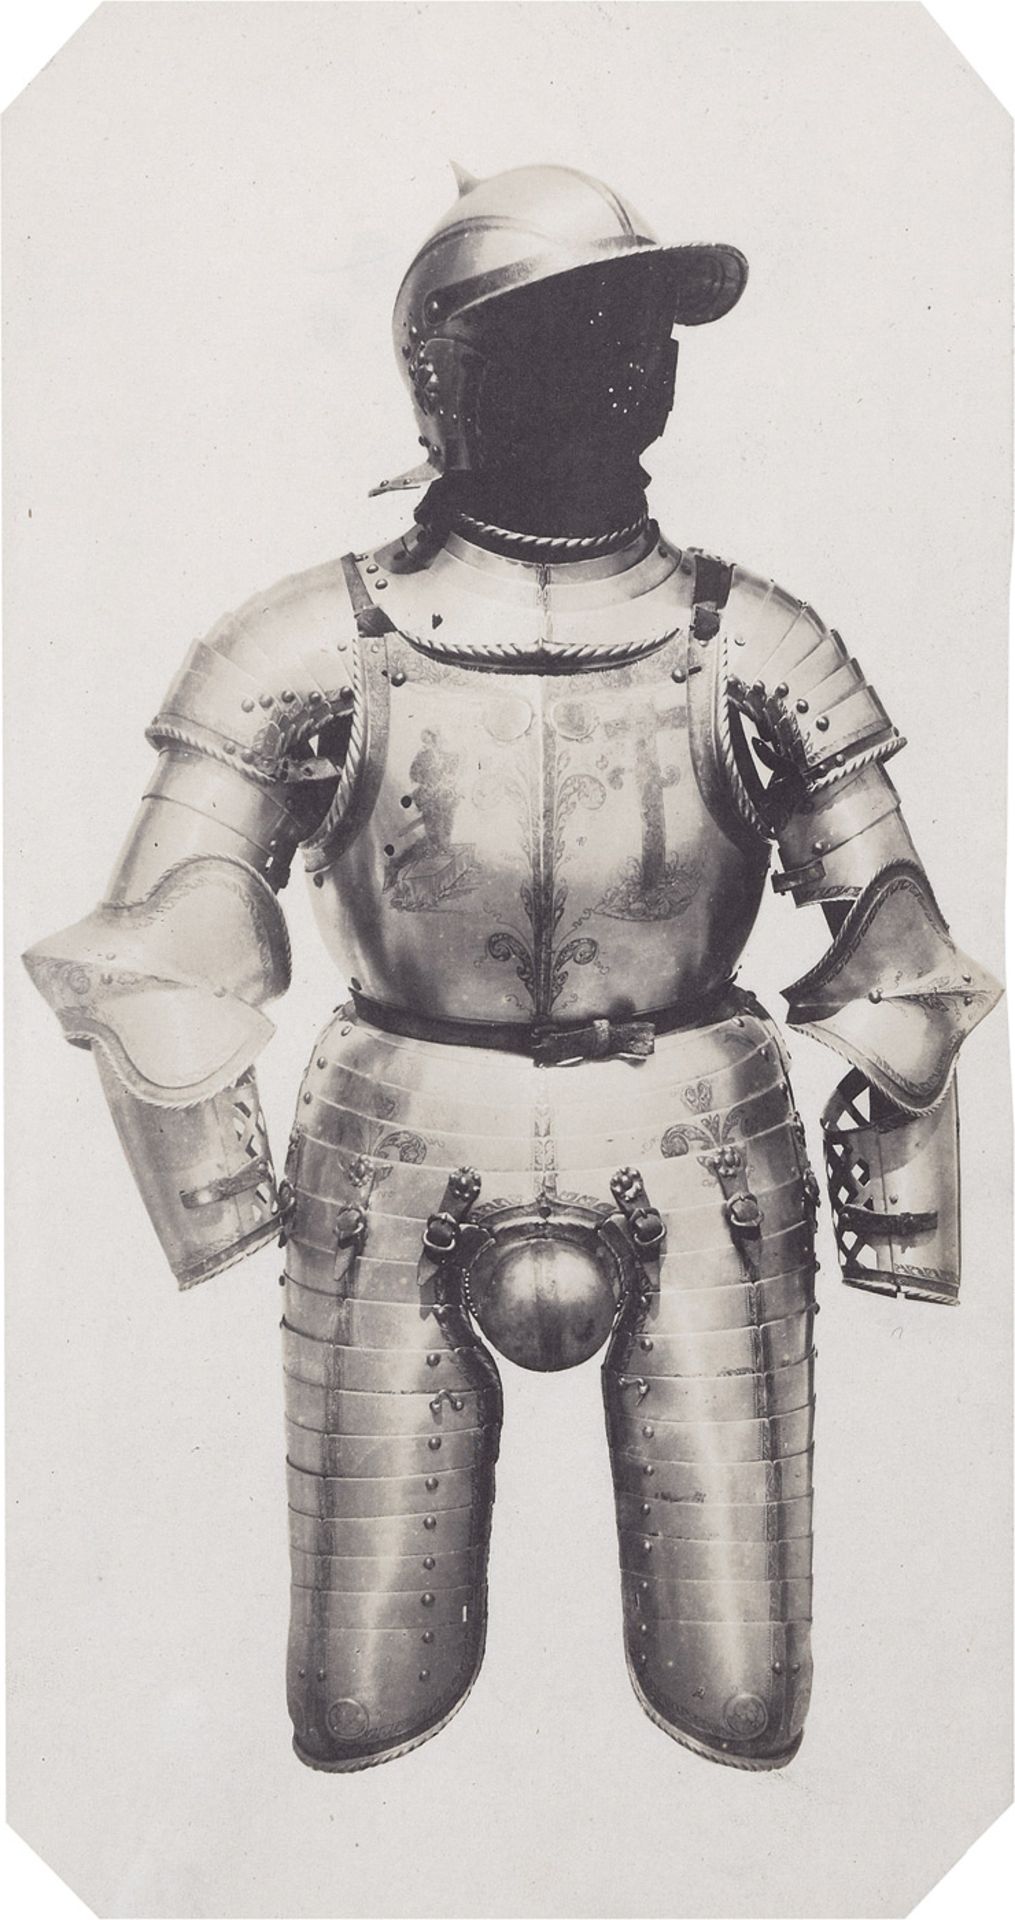 Groll, Andreas: Armor from the Ambras CollectionSelected armor images from the Ambras Collection: "